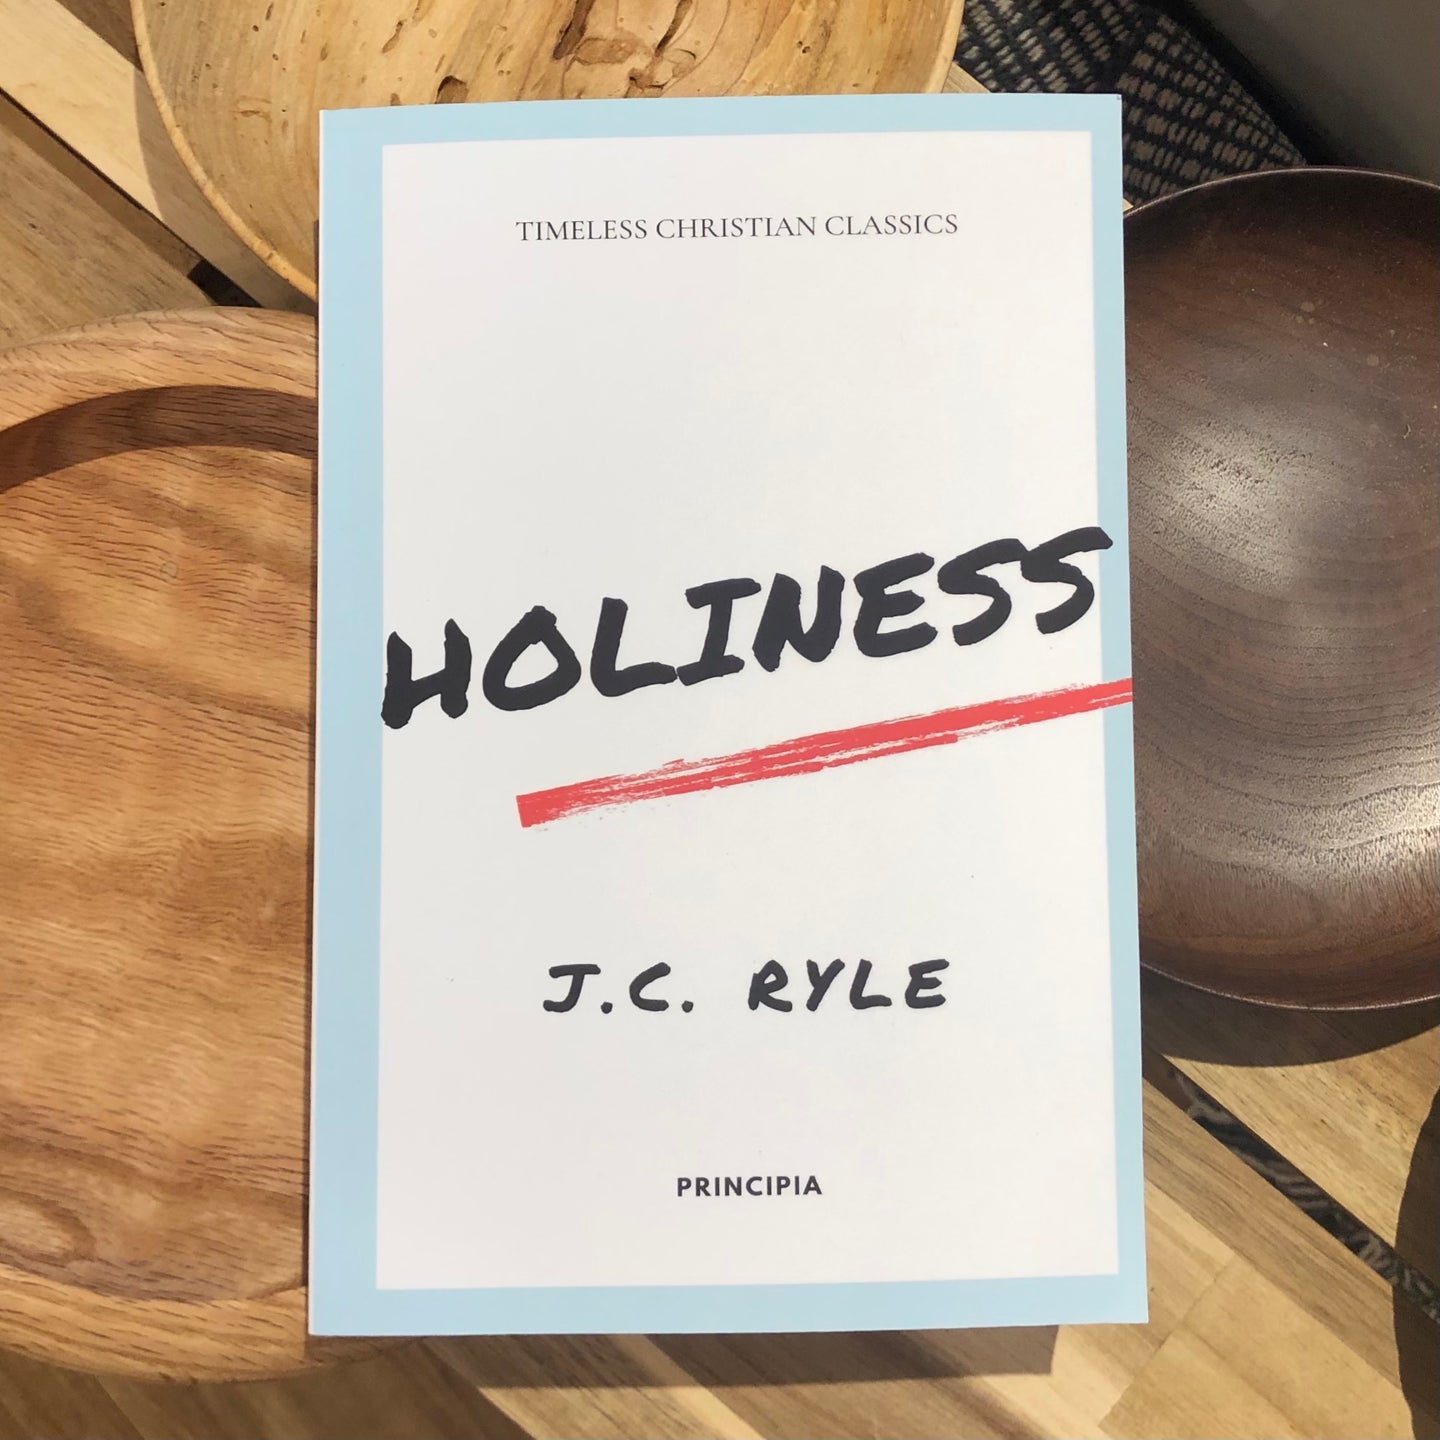 Holiness By J.C. Ryle